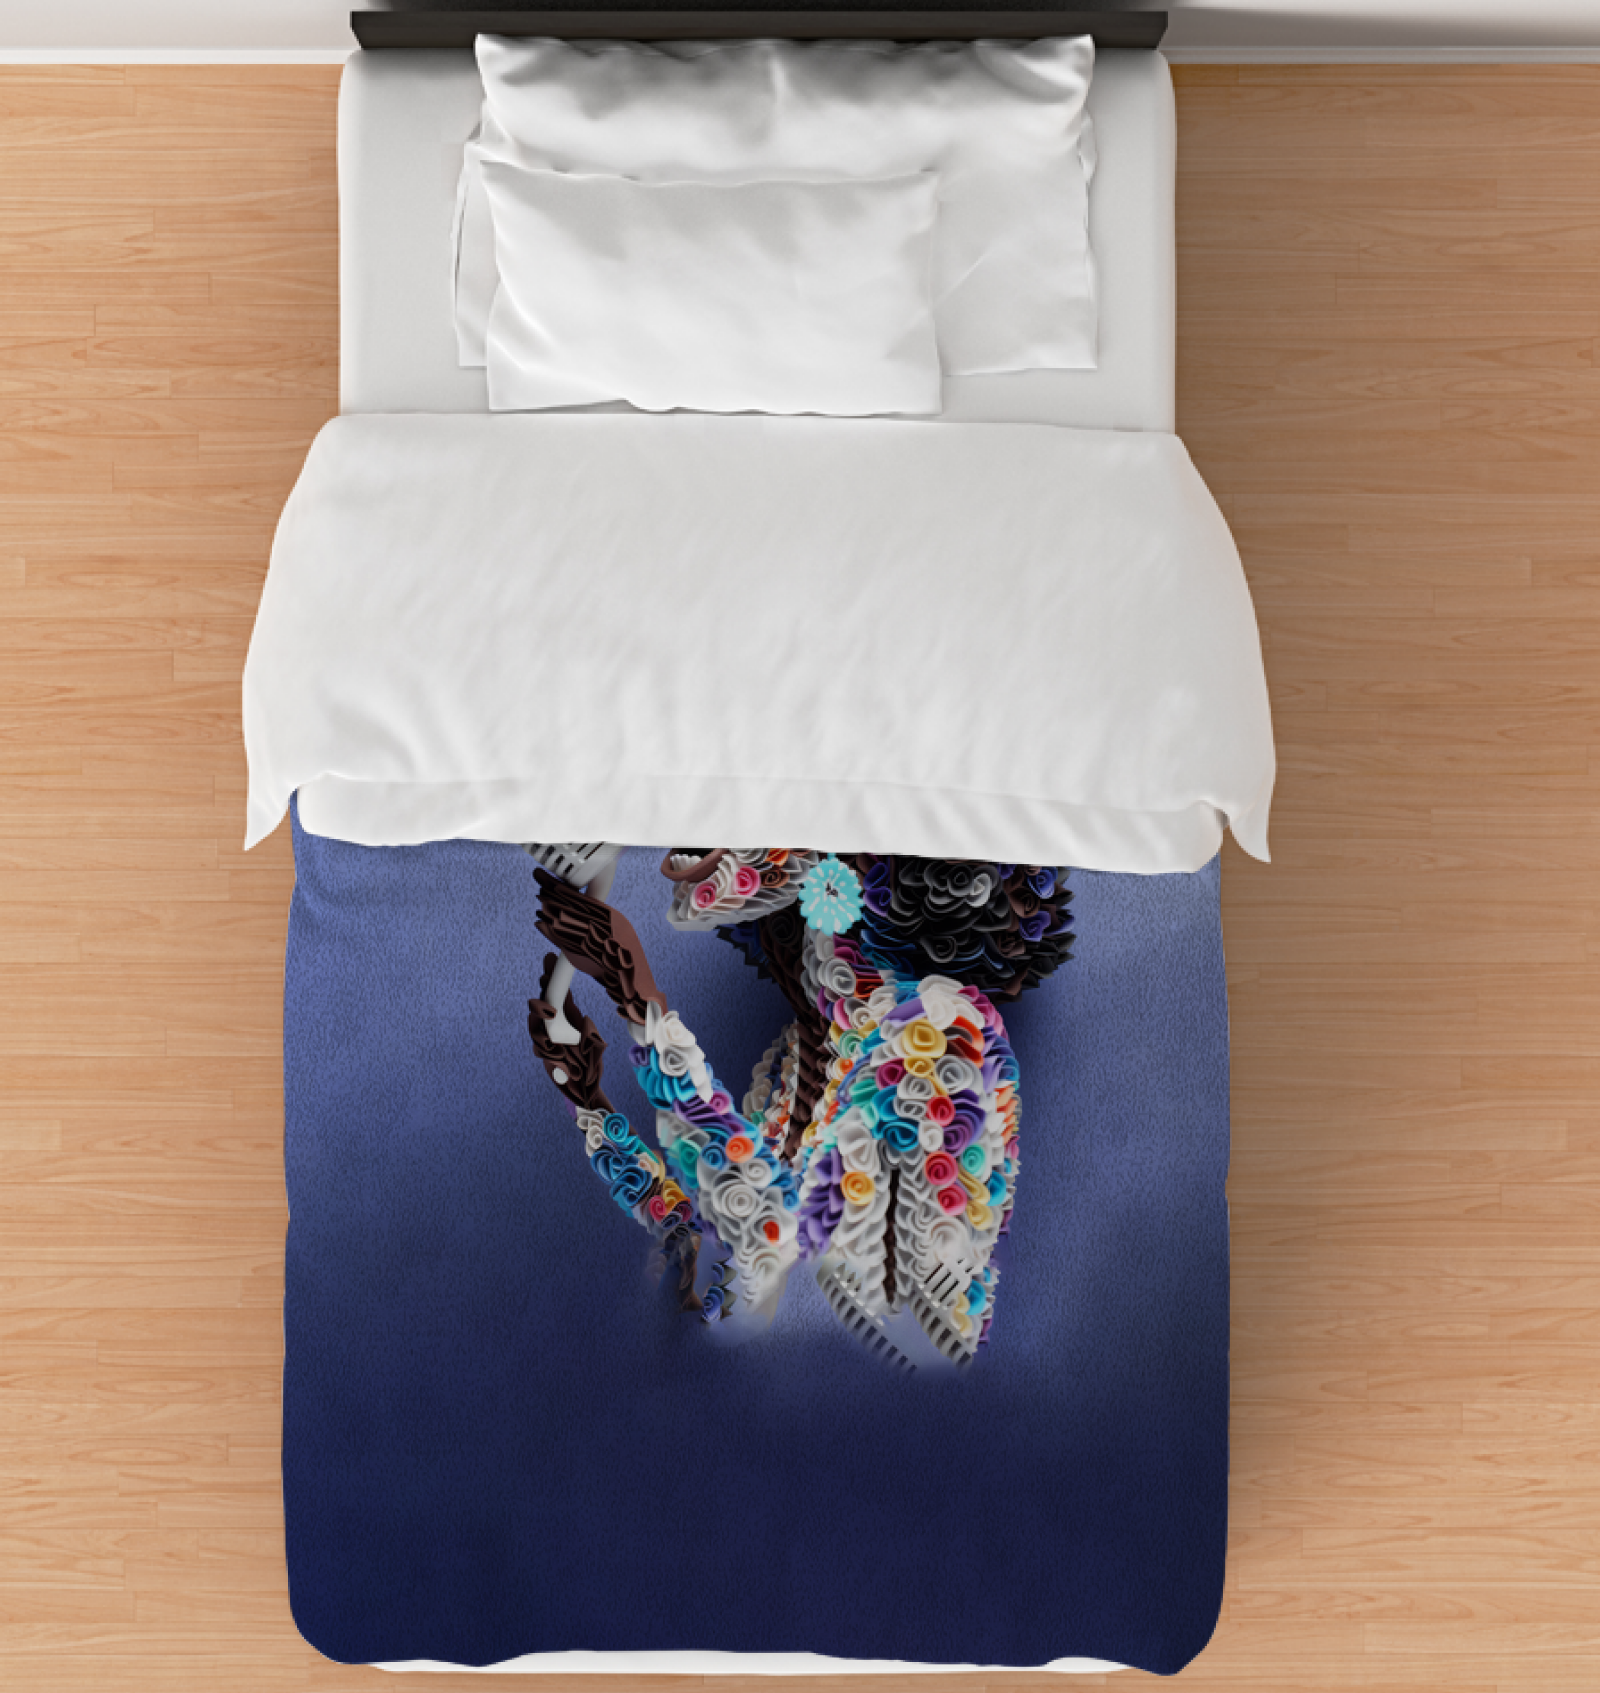 Dreamy Northern Lights themed bedding, Aurora Borealis Duvet Cover in a cozy bedroom setting.